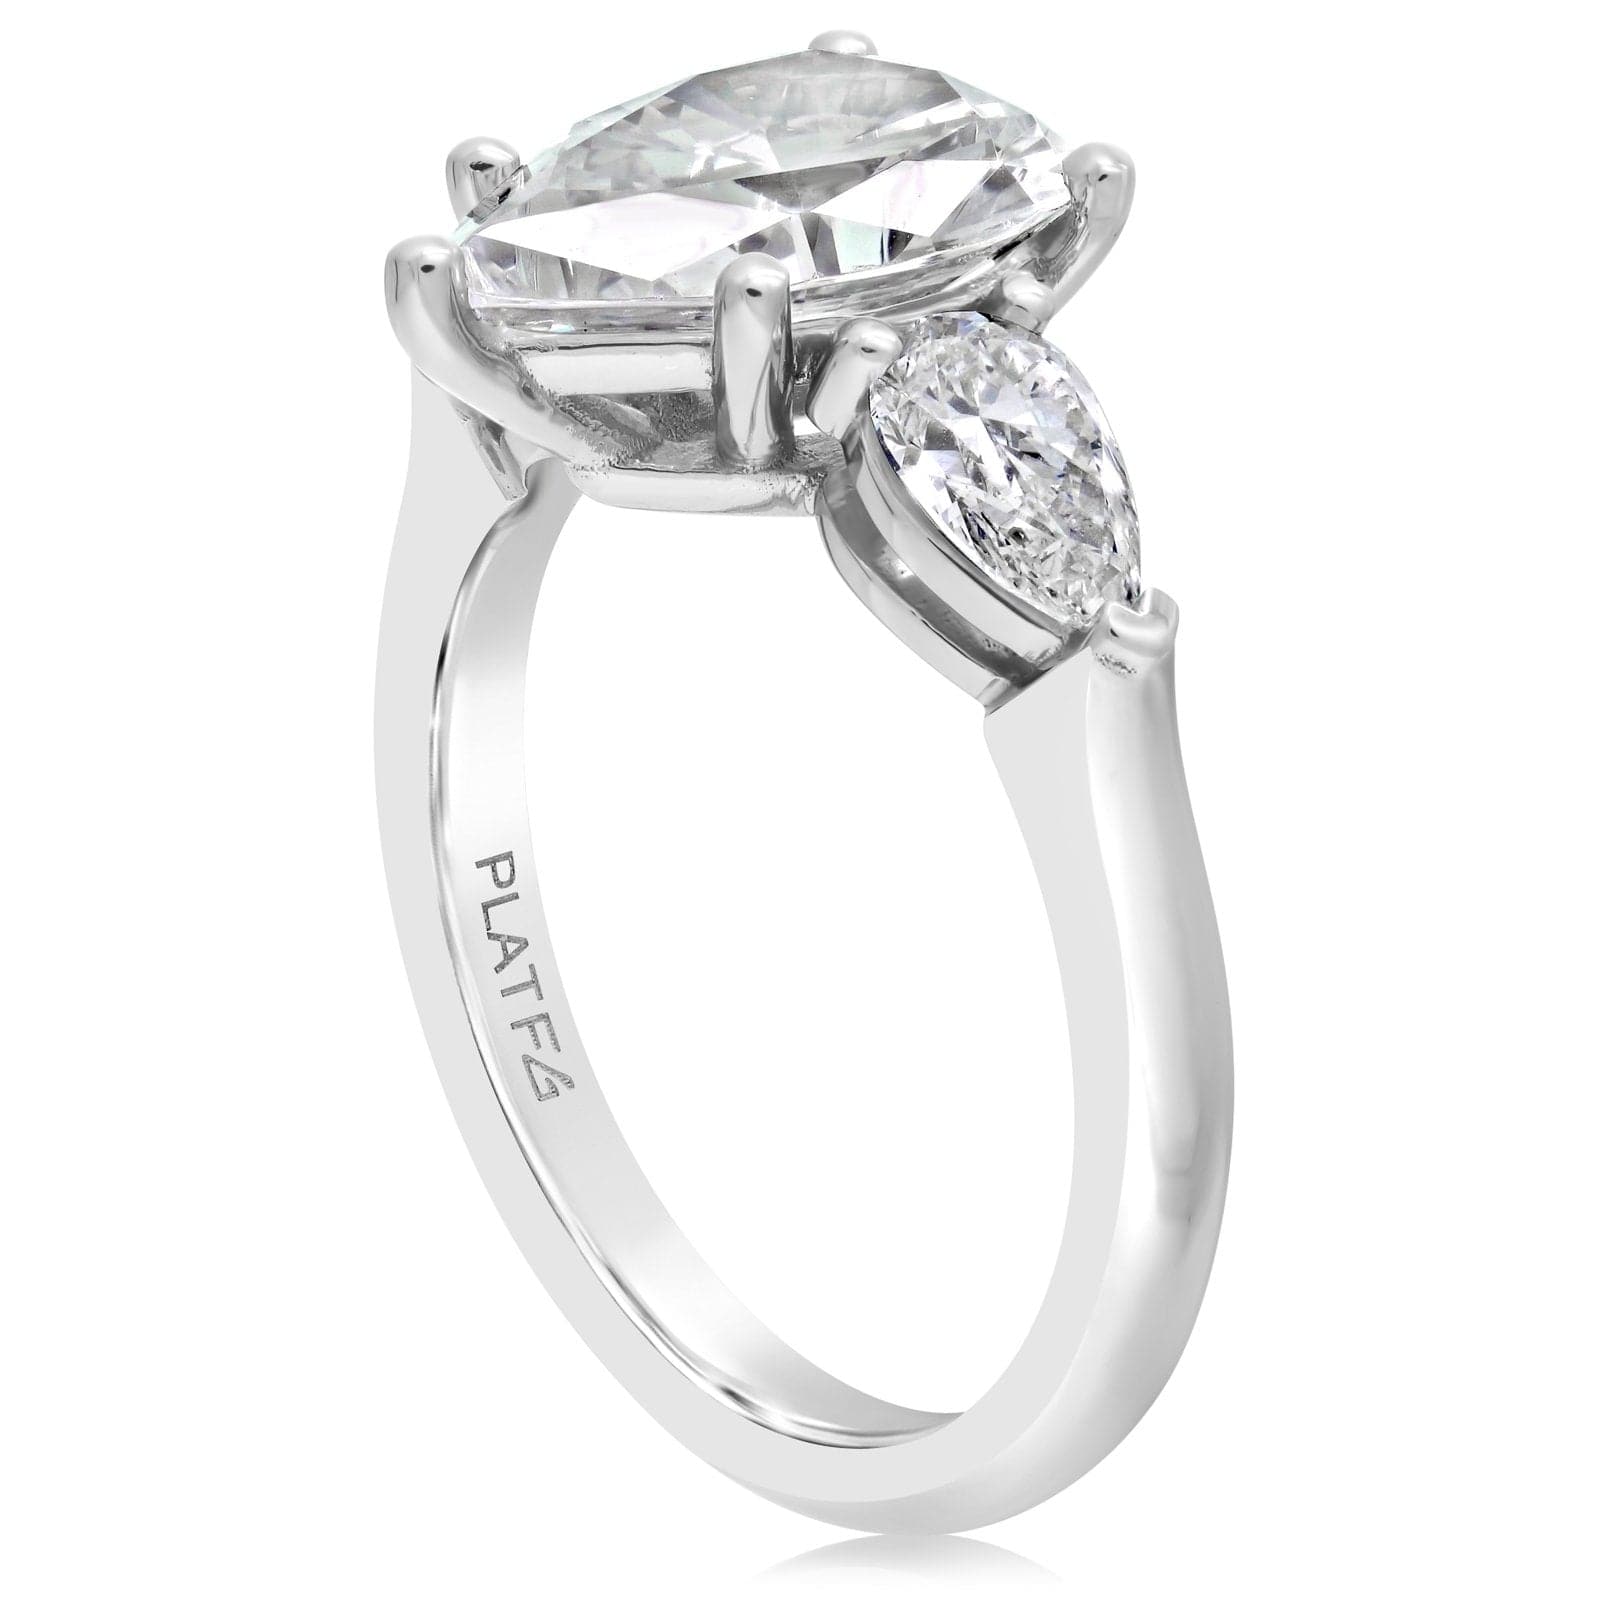 Top 20 Questions About Pear Shaped Engagement Rings – Raymond Lee Jewelers